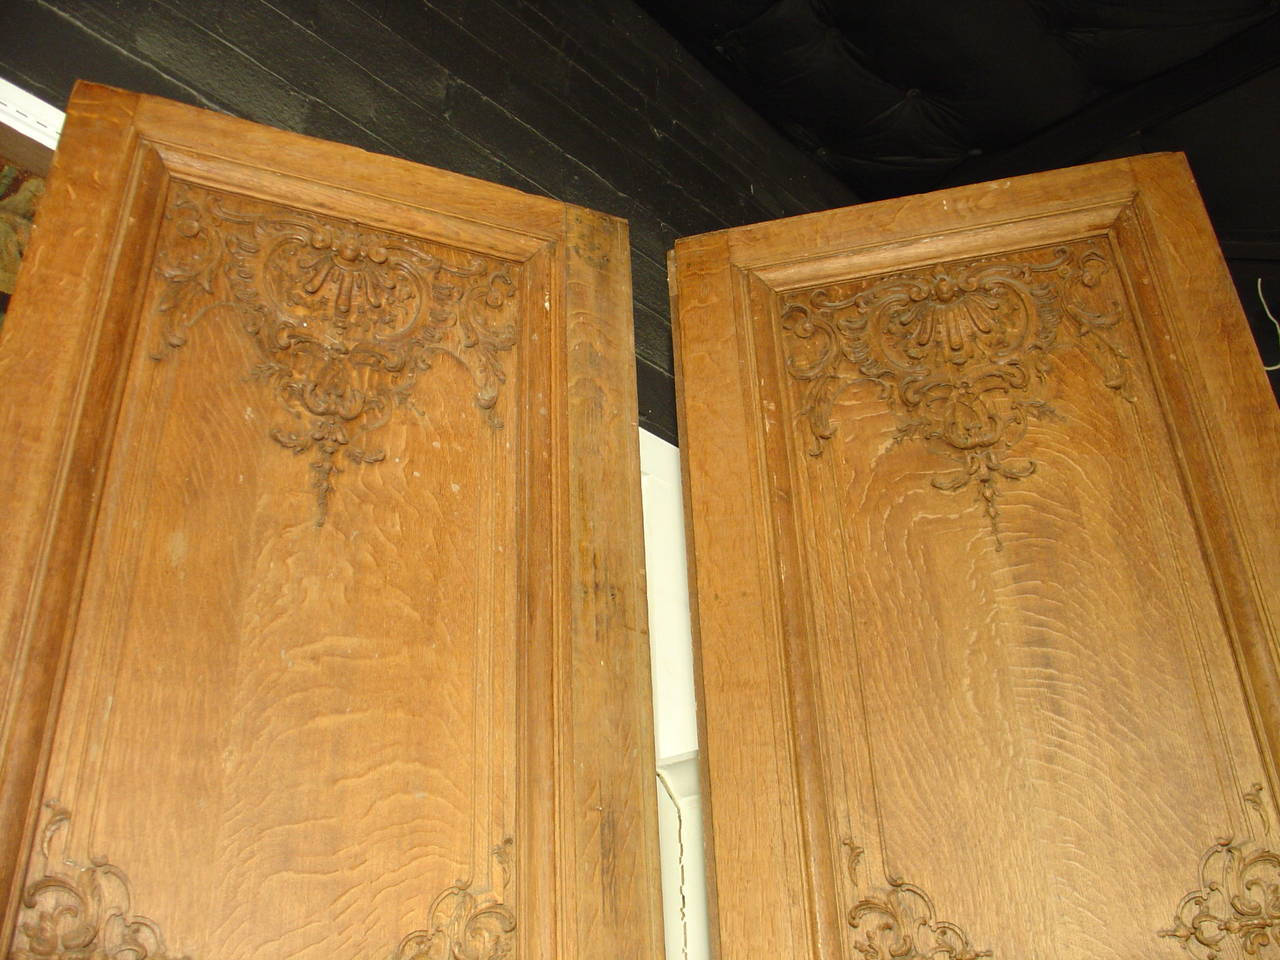 Oak Pair of Tall Regence Style French Doors from the Early 1800s